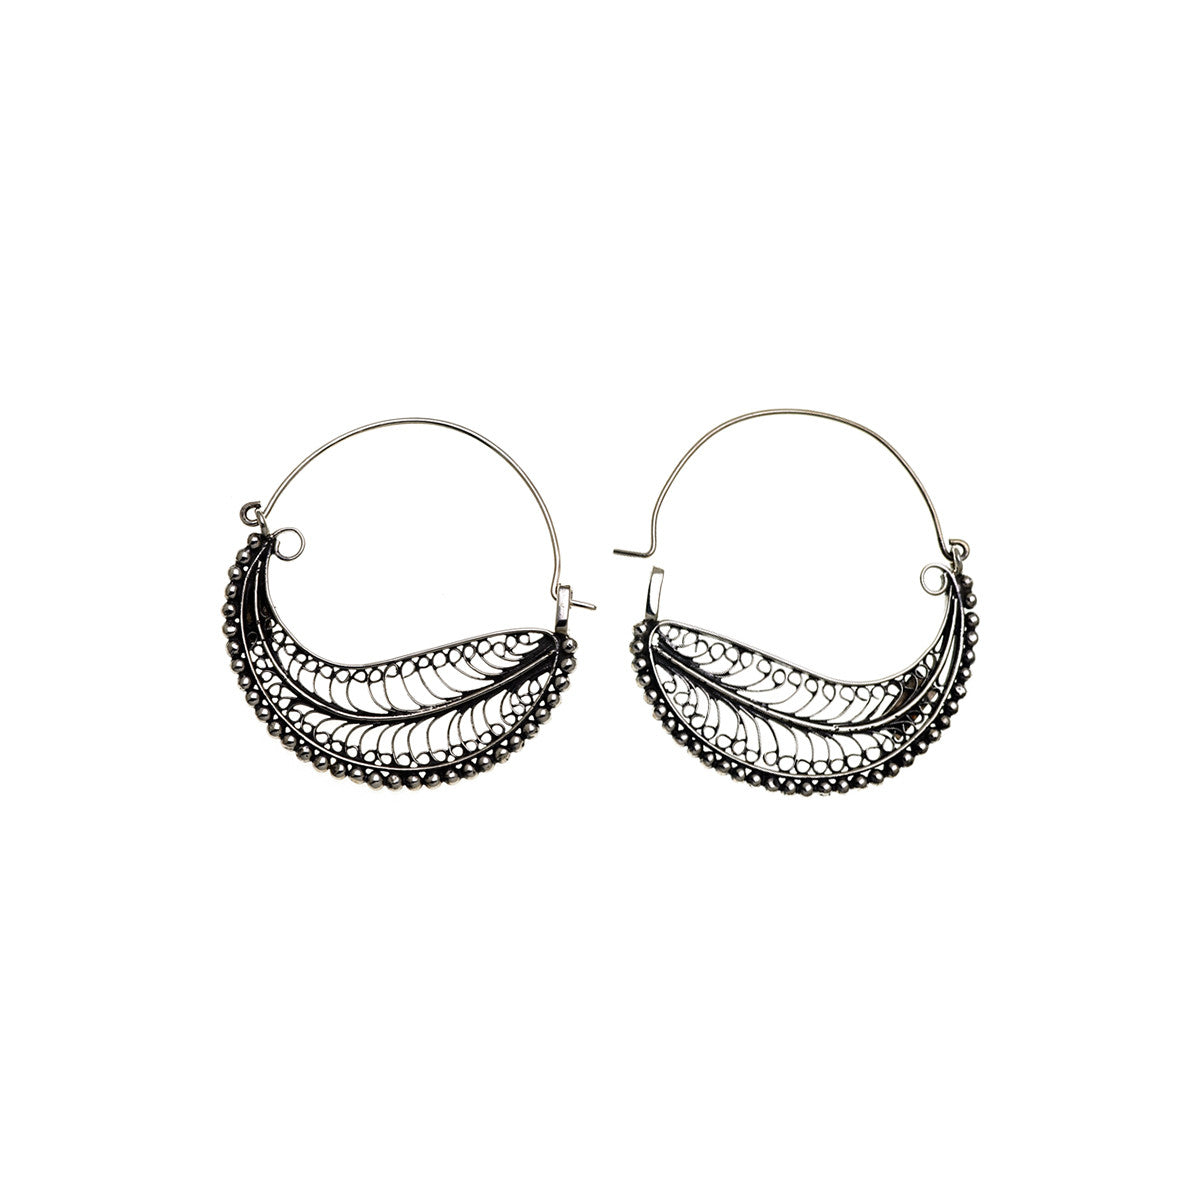 Chand Bali Small Feather Sterling Silver Hoop Earring